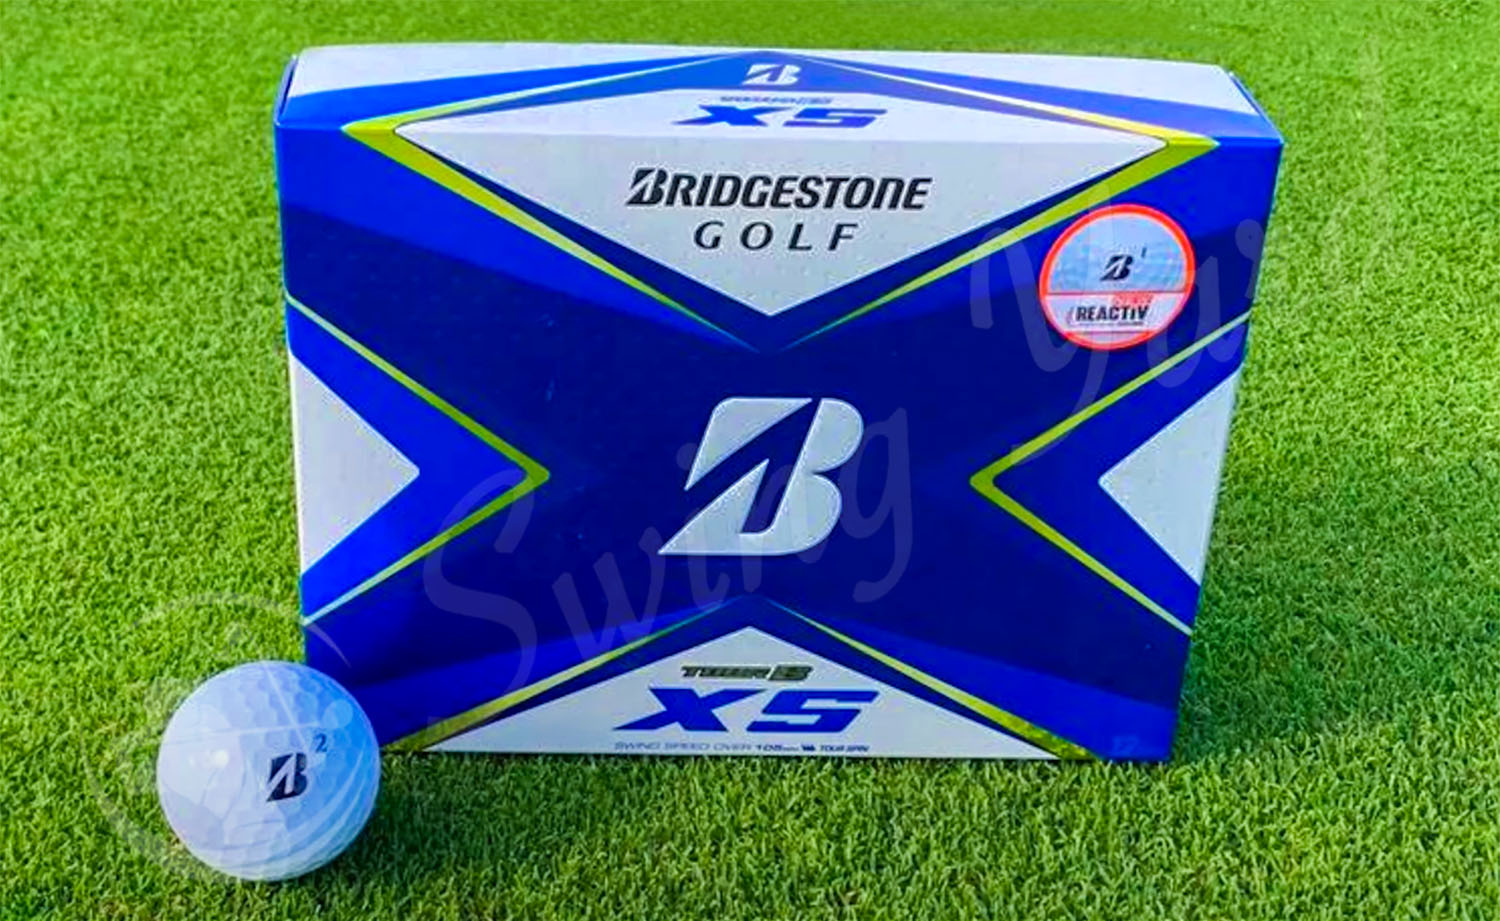 A frontside view of Bridgestone Tour B XS box in the grass at the golf course